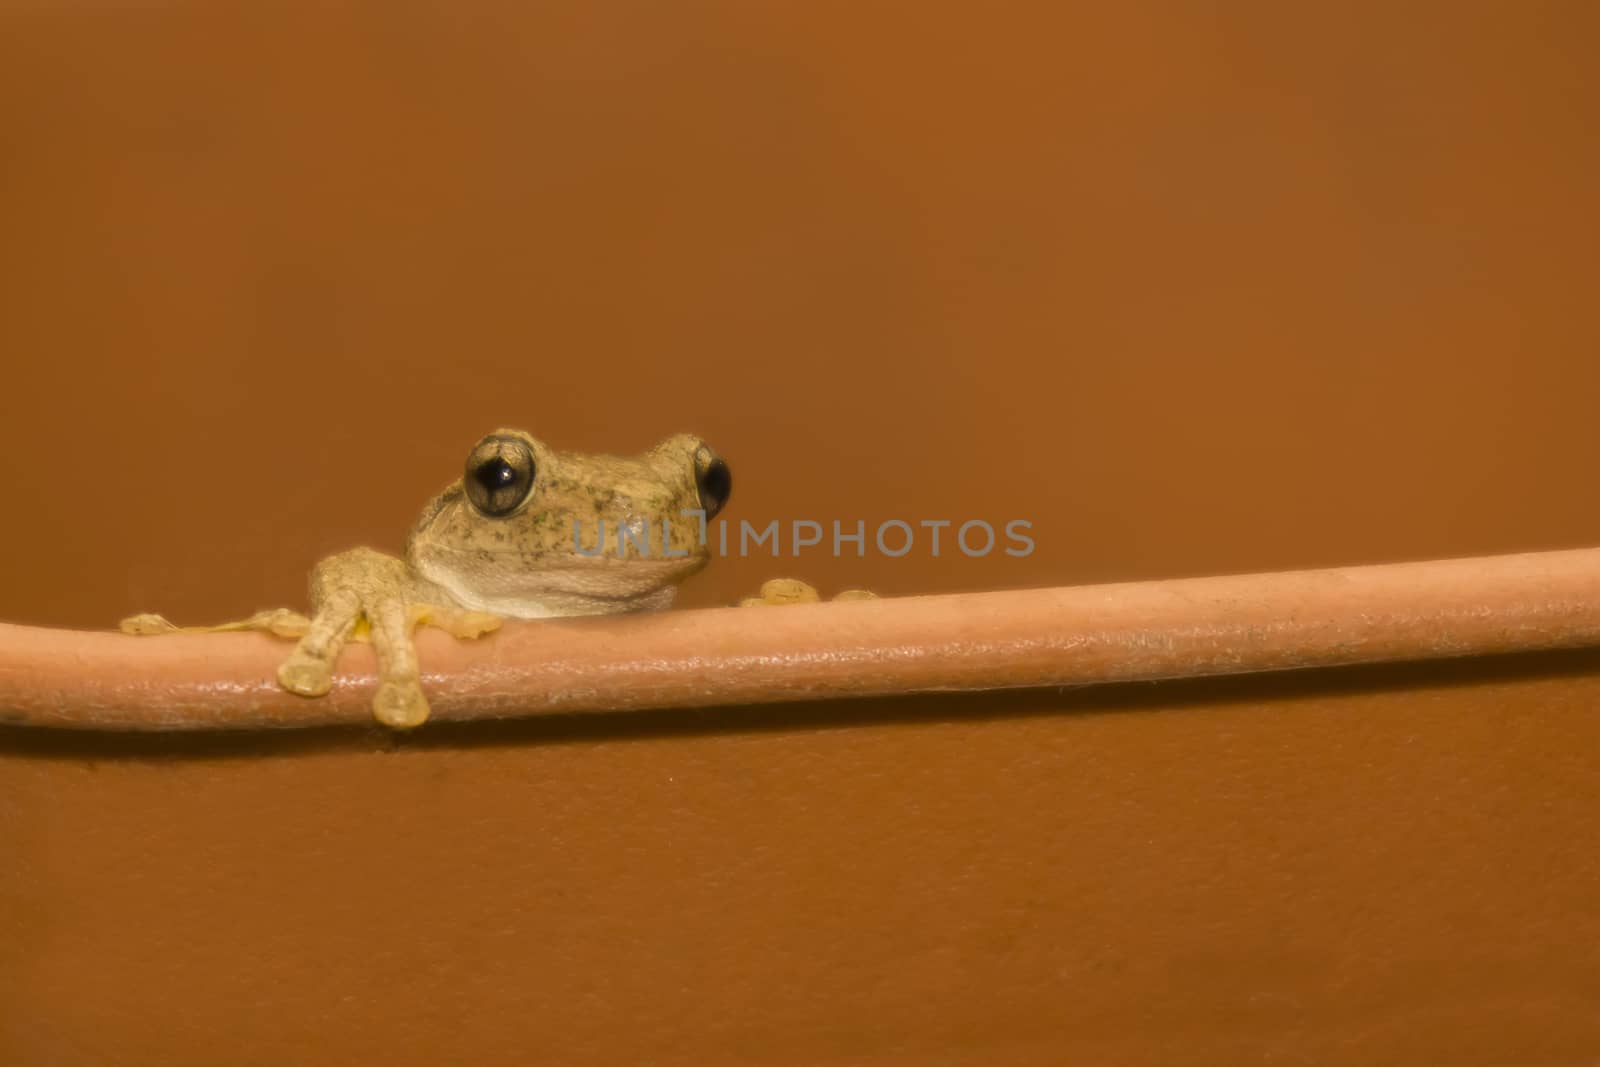 Cute frog climbing on the rim of a plant pot by definitearts